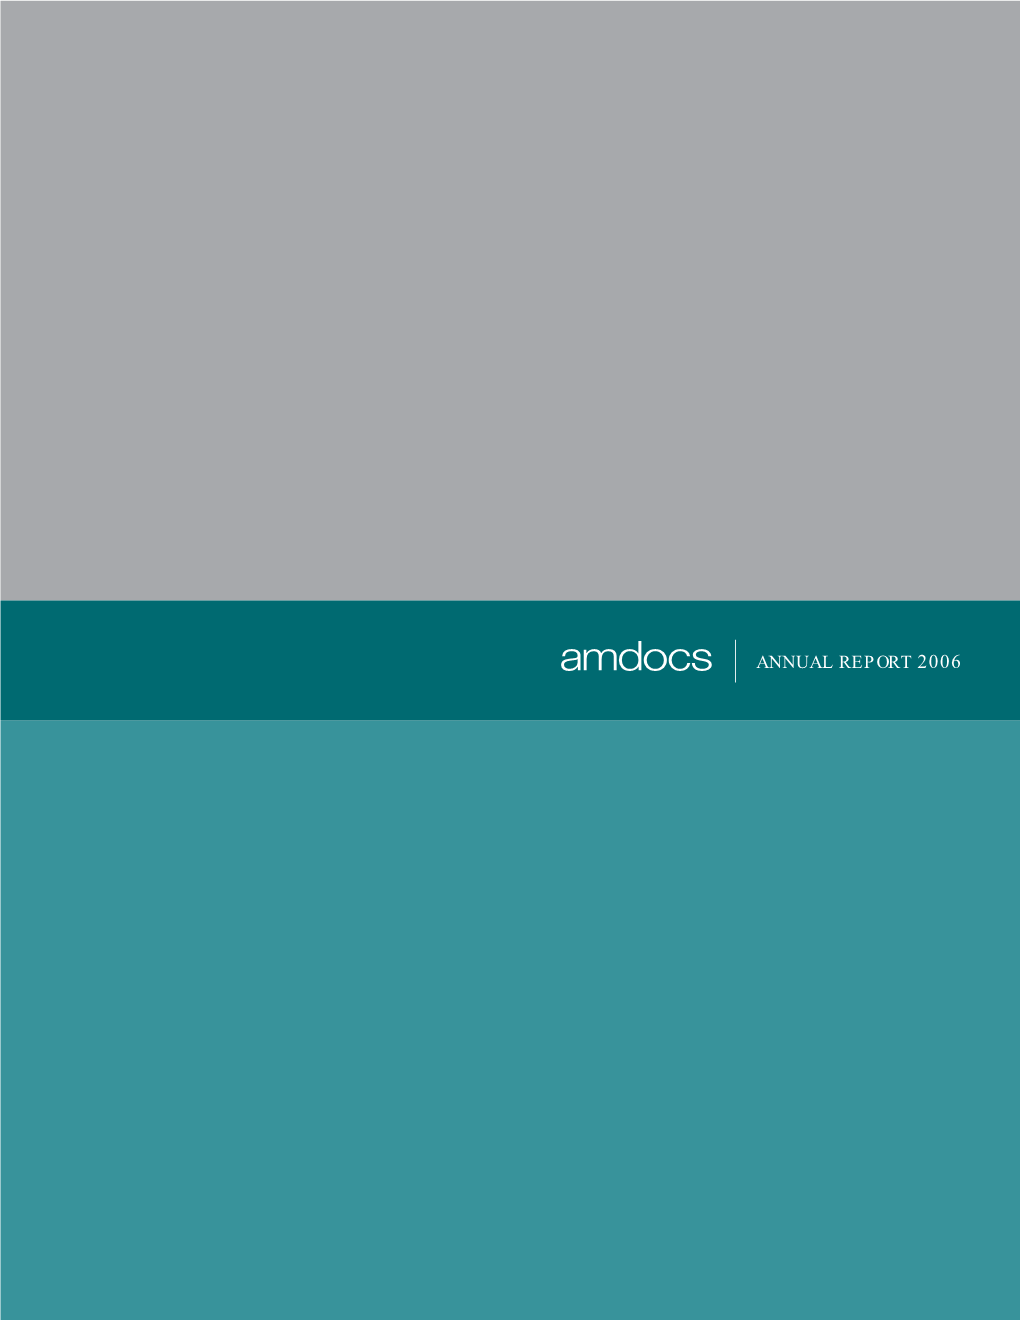 ANNUAL REPORT 2006 and Logo, Ensemble, Enabler, Amdocs, Including the Amdocs Mark Roperty of Amdocs, and May Not Be Used Without Permission